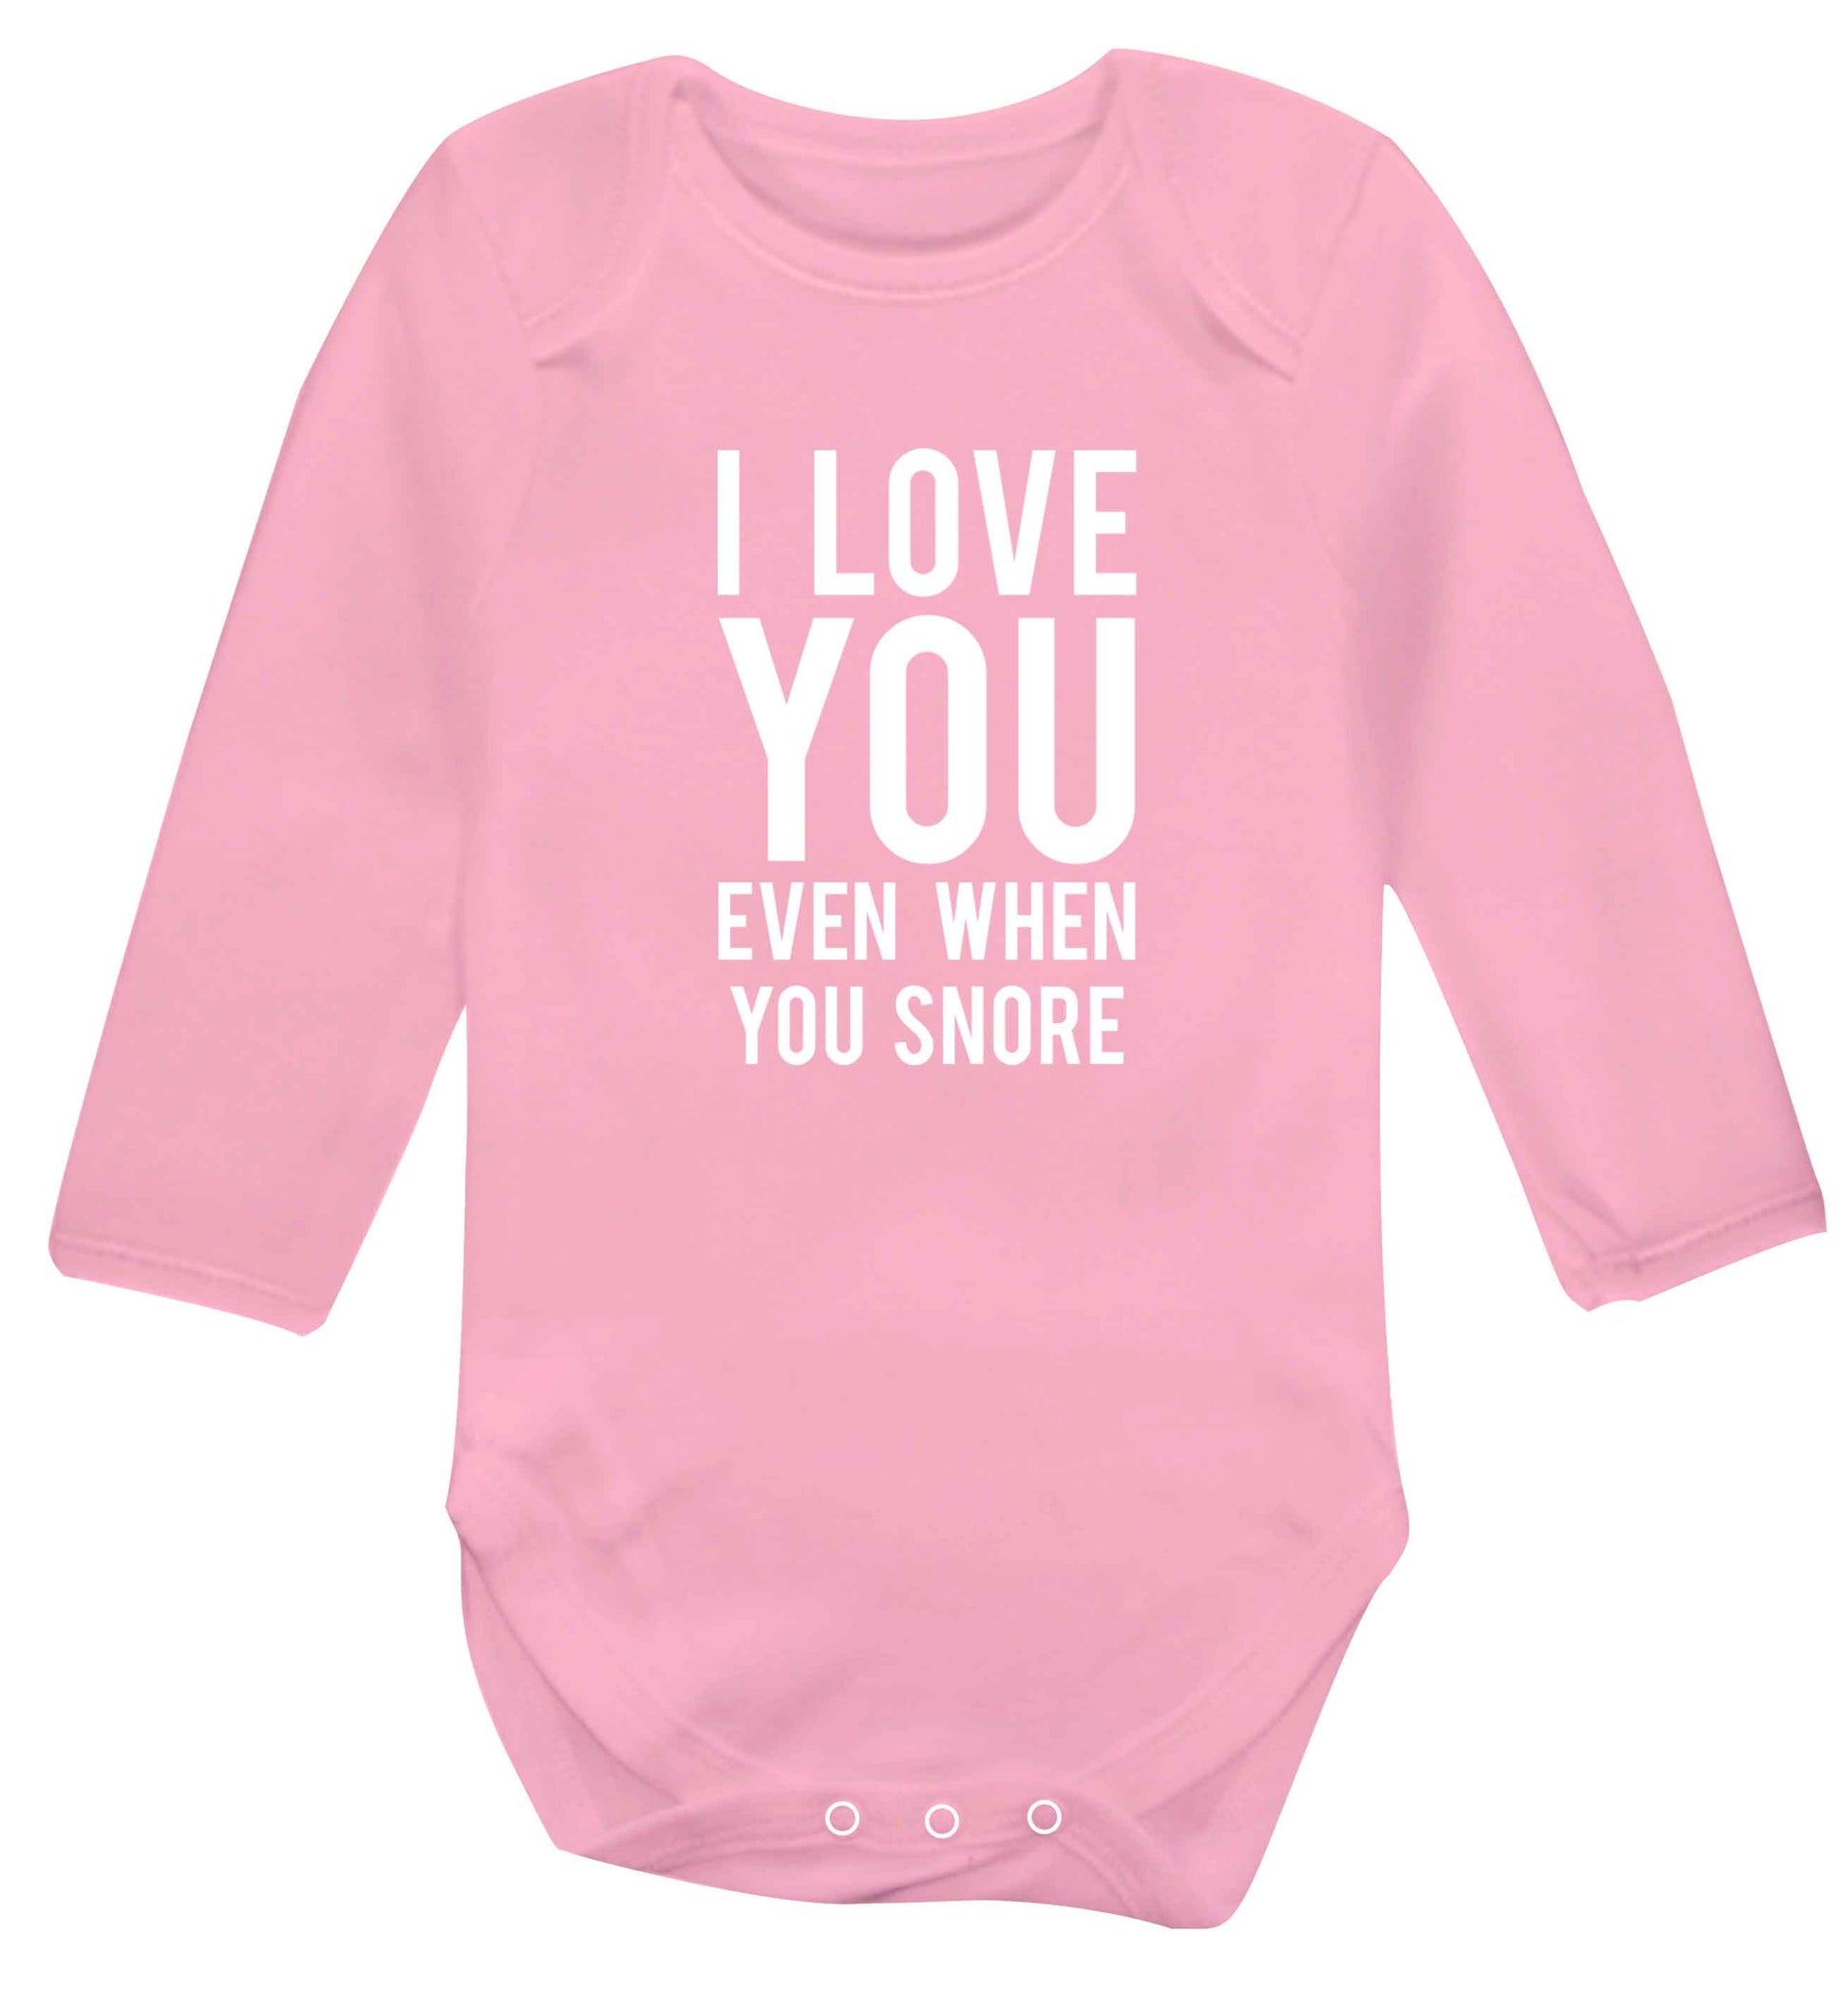 I love you even when you snore baby vest long sleeved pale pink 6-12 months